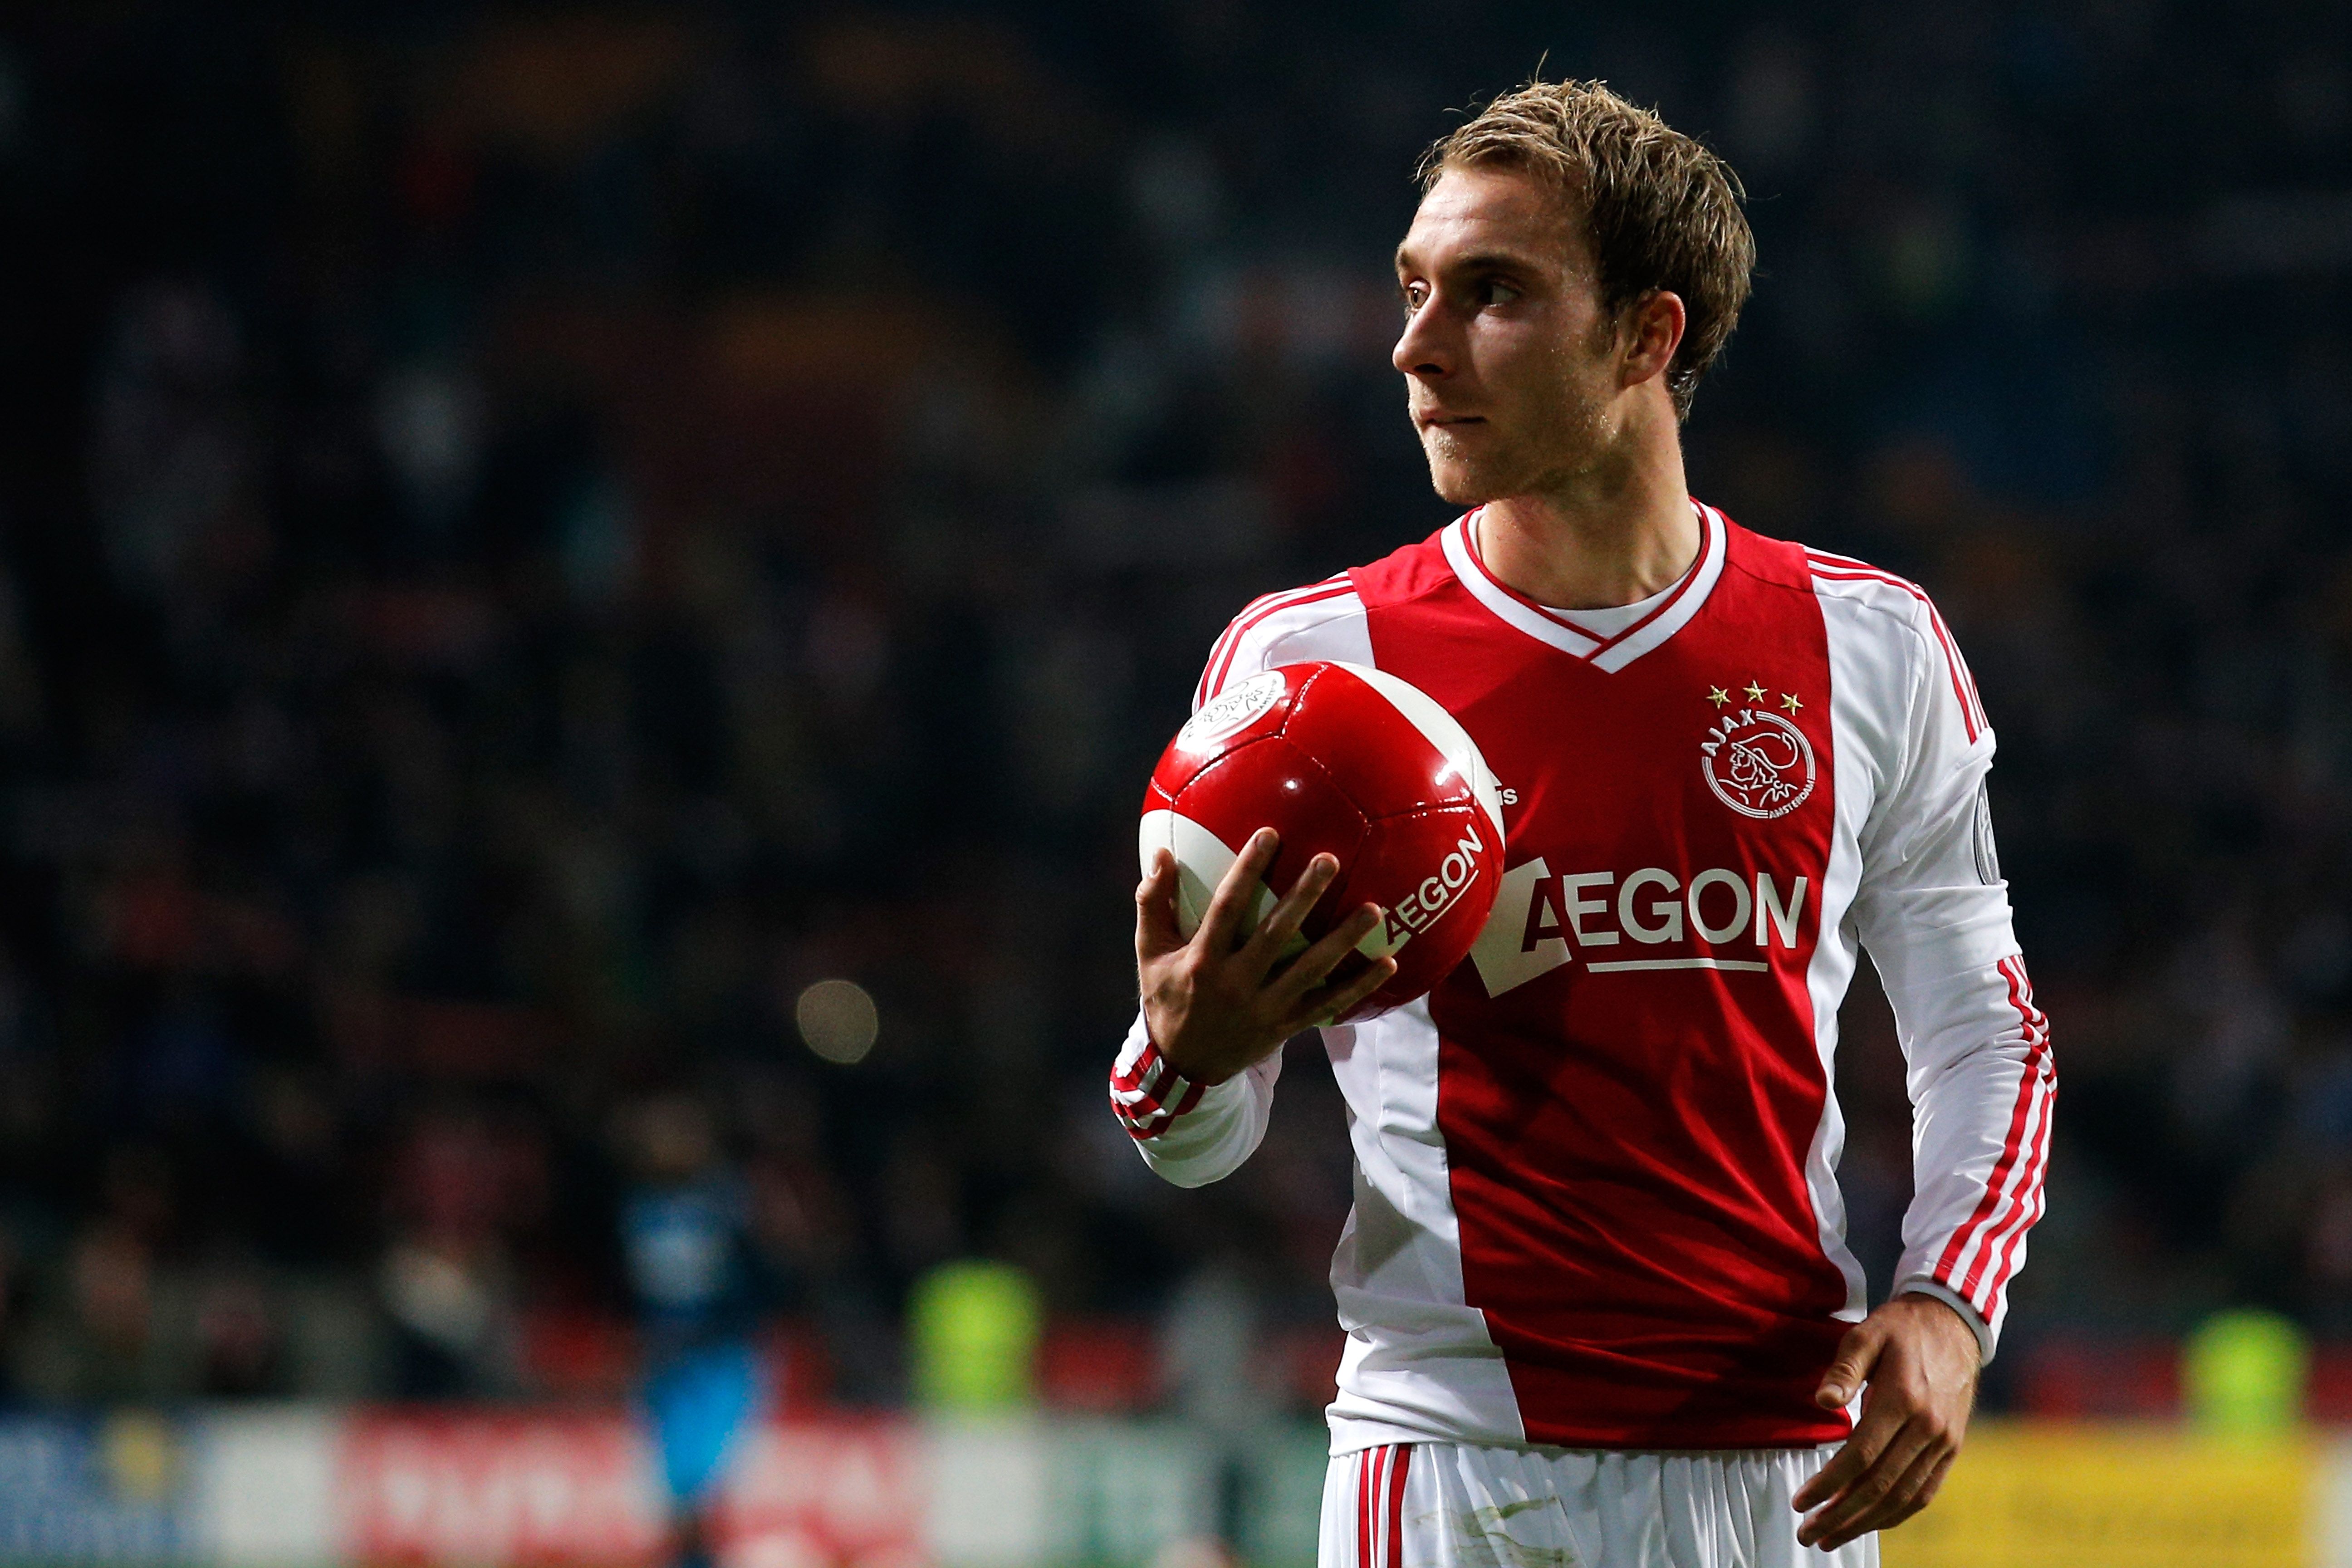 Ajax midfielder won't sign a new contract, says Overmars